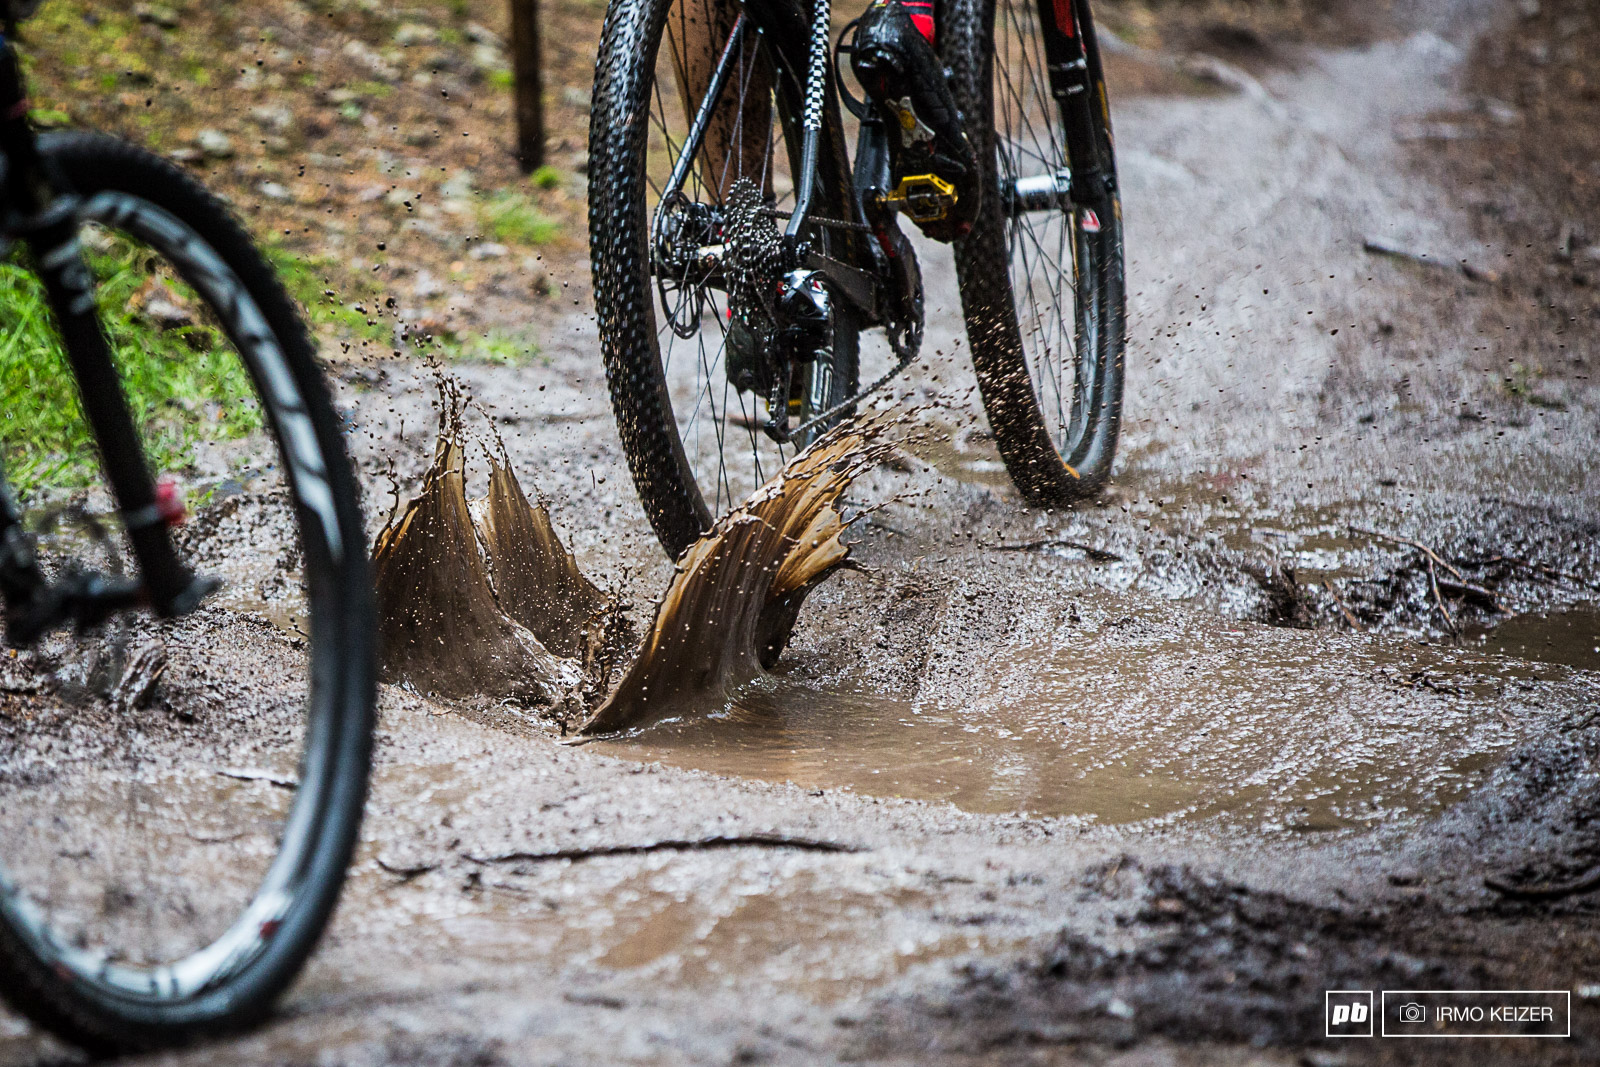 Heavy rains in the past night changed the course slightly yet it remained in an excellent shape. Riders will have to be careful of slippery roots and rocks though as a slight drizzle keeps them wet.